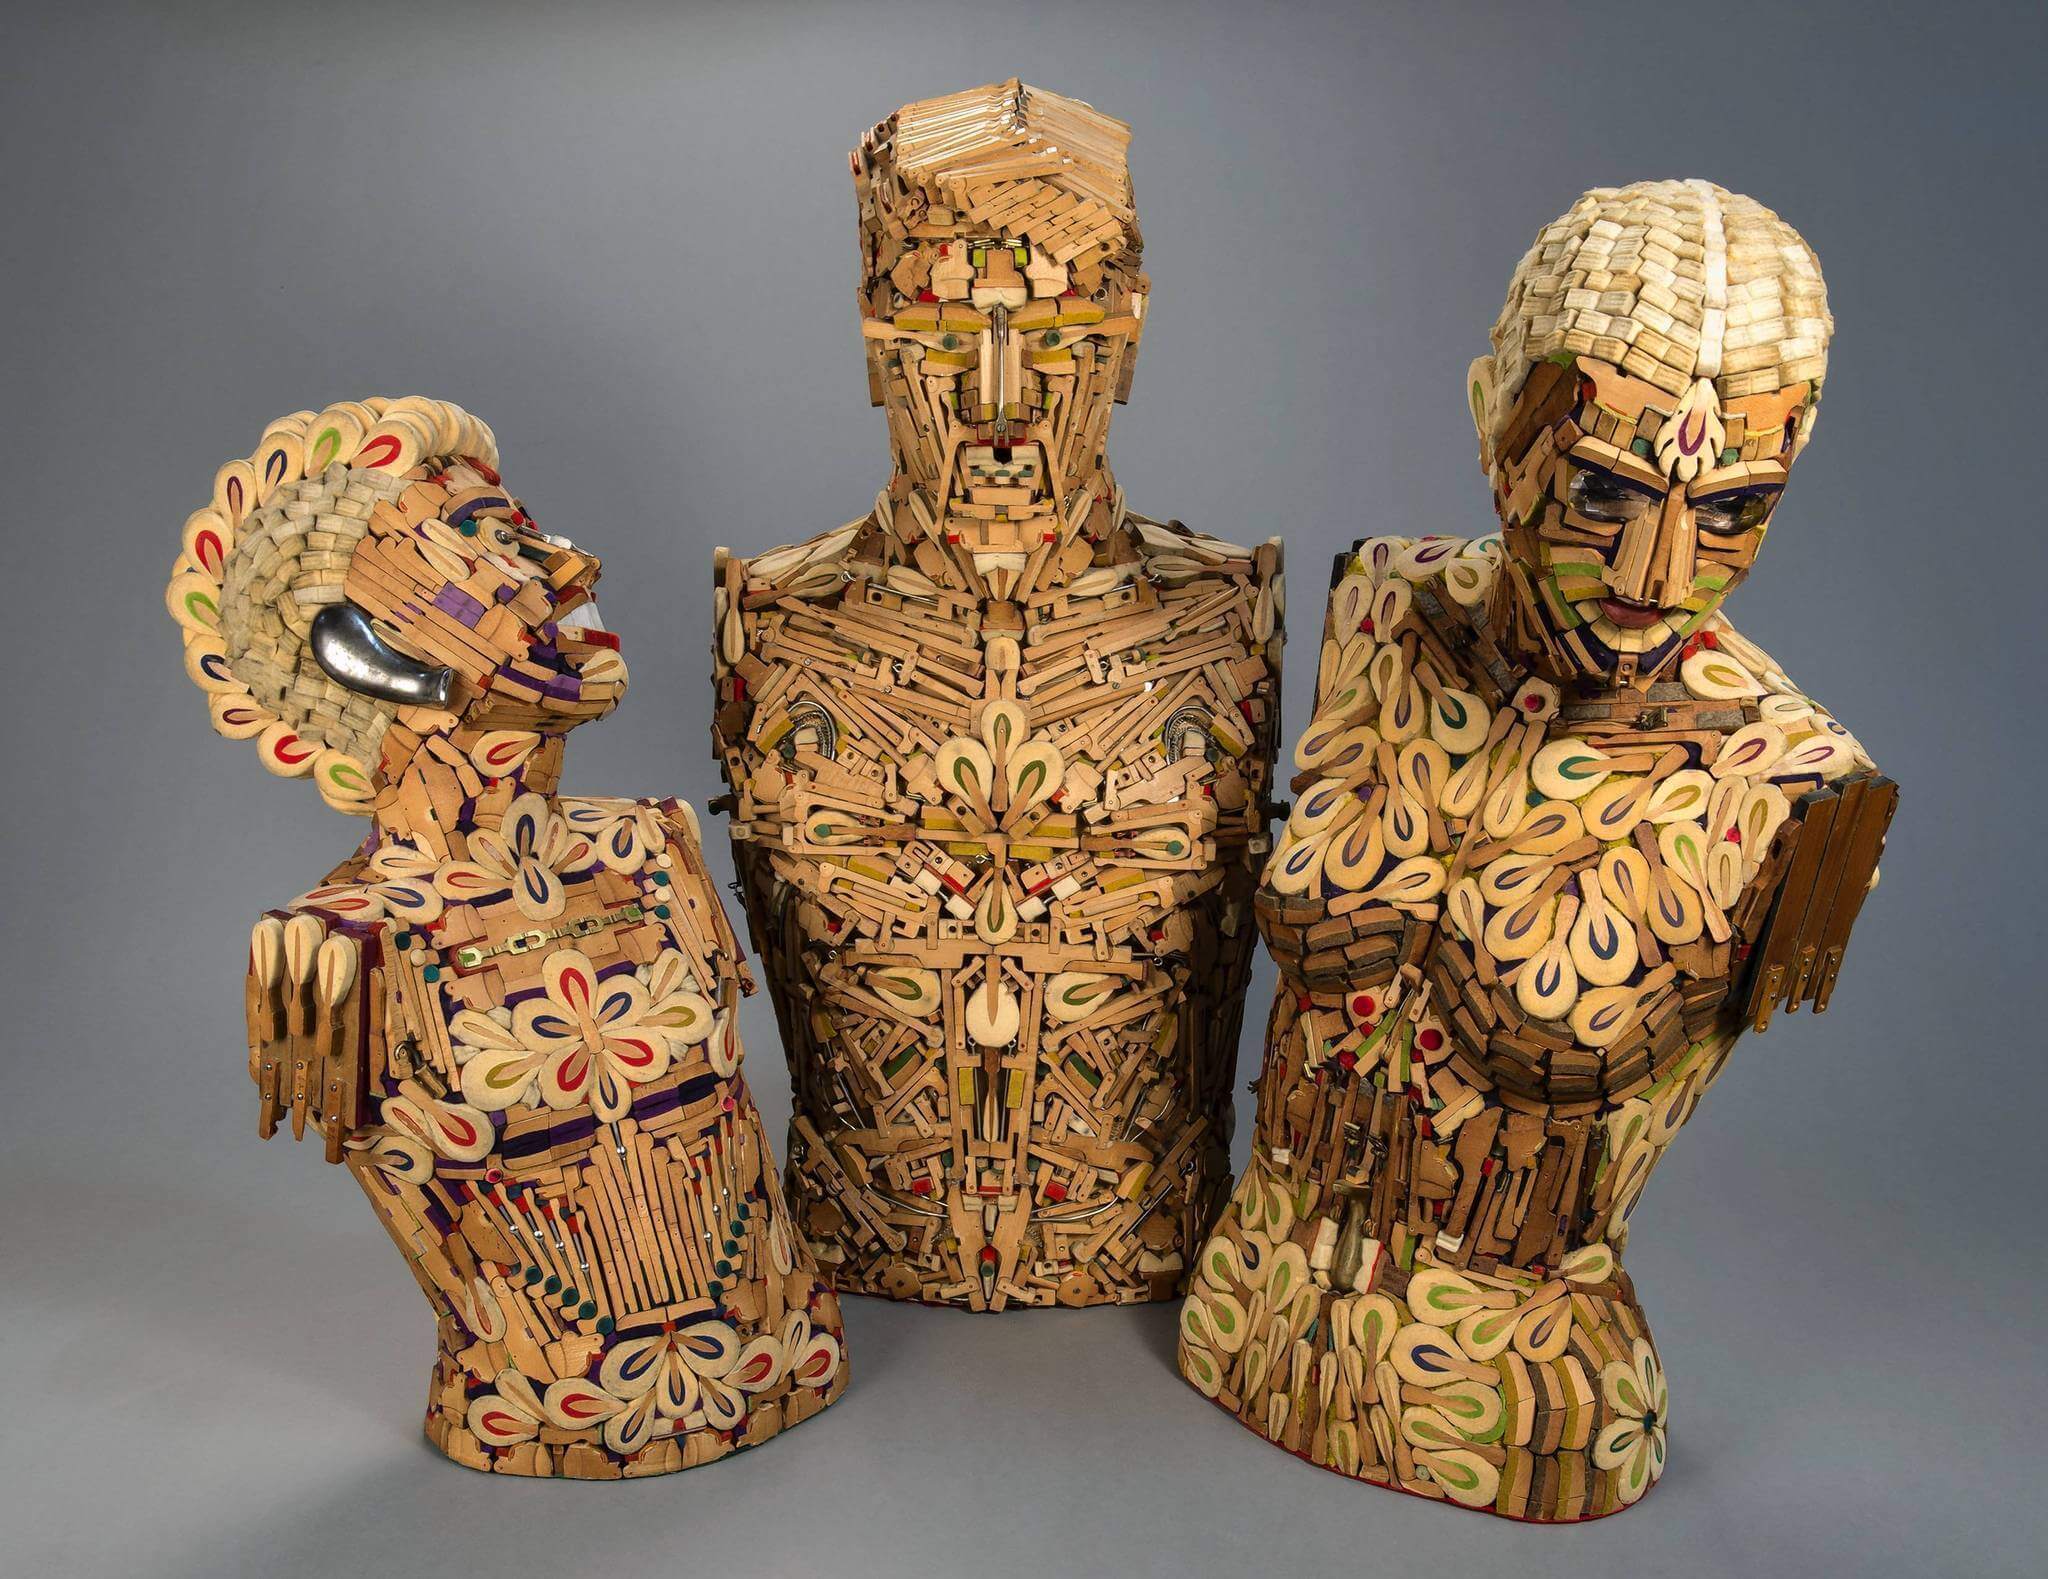 Allen Christian's 2012 work called 'Piano Family' depicting three torsos with
                heads carved out of spare piano parts, standing upright on a gray backdrop.